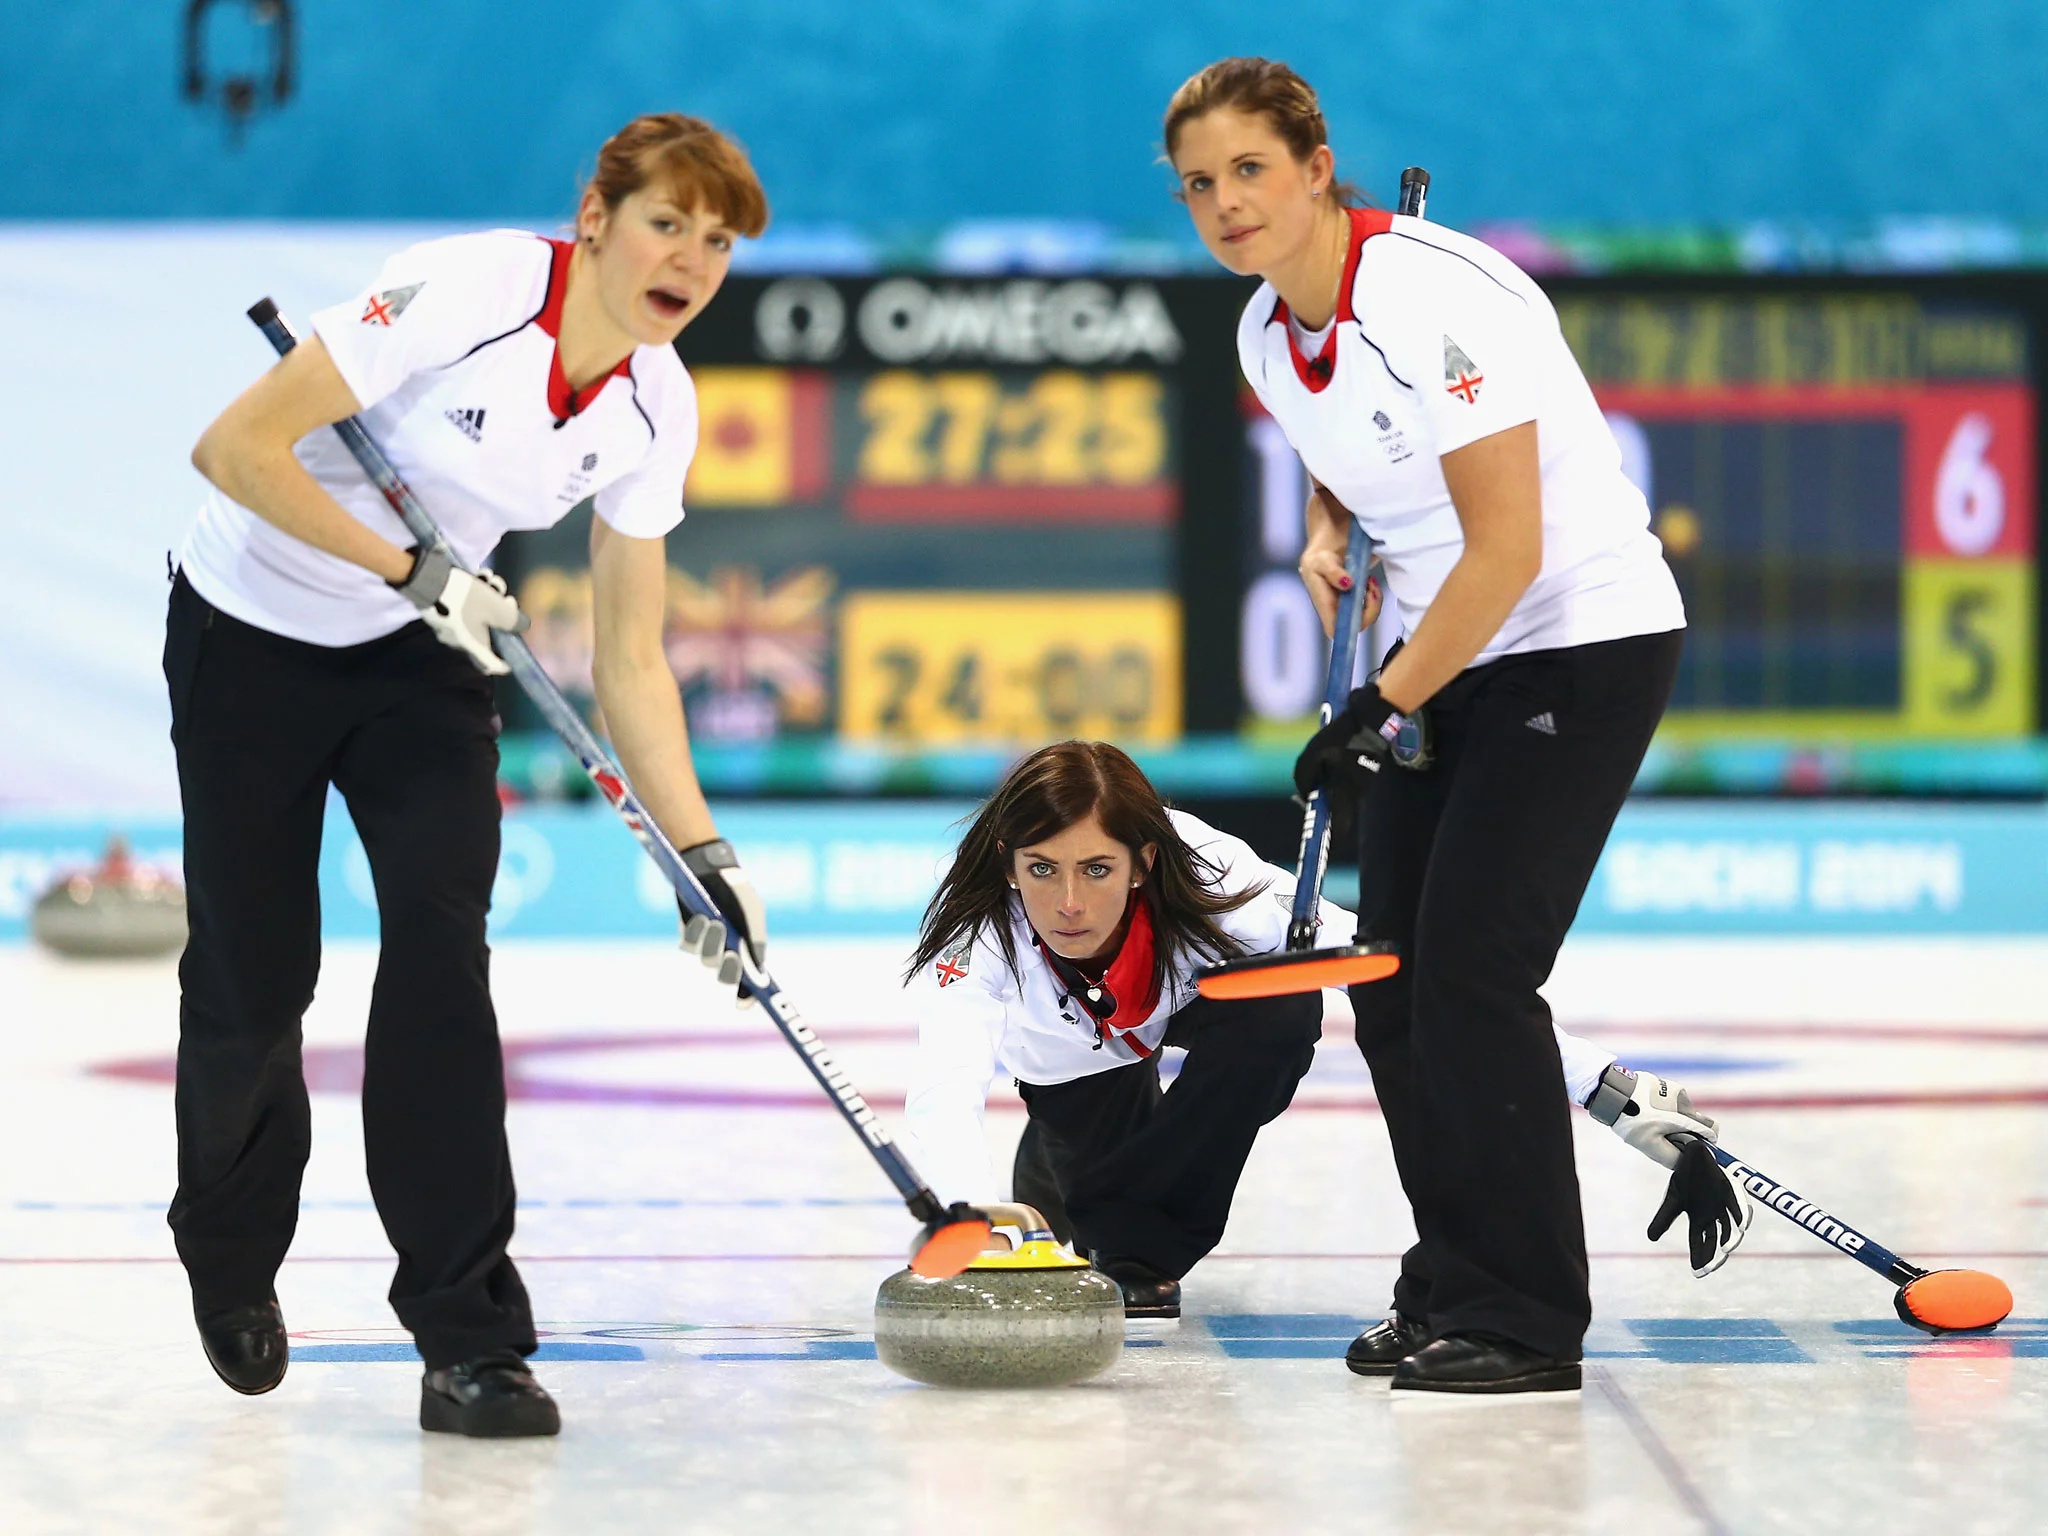 Curling archives, Curling history, Curling records, Sports documentation, 2050x1540 HD Desktop